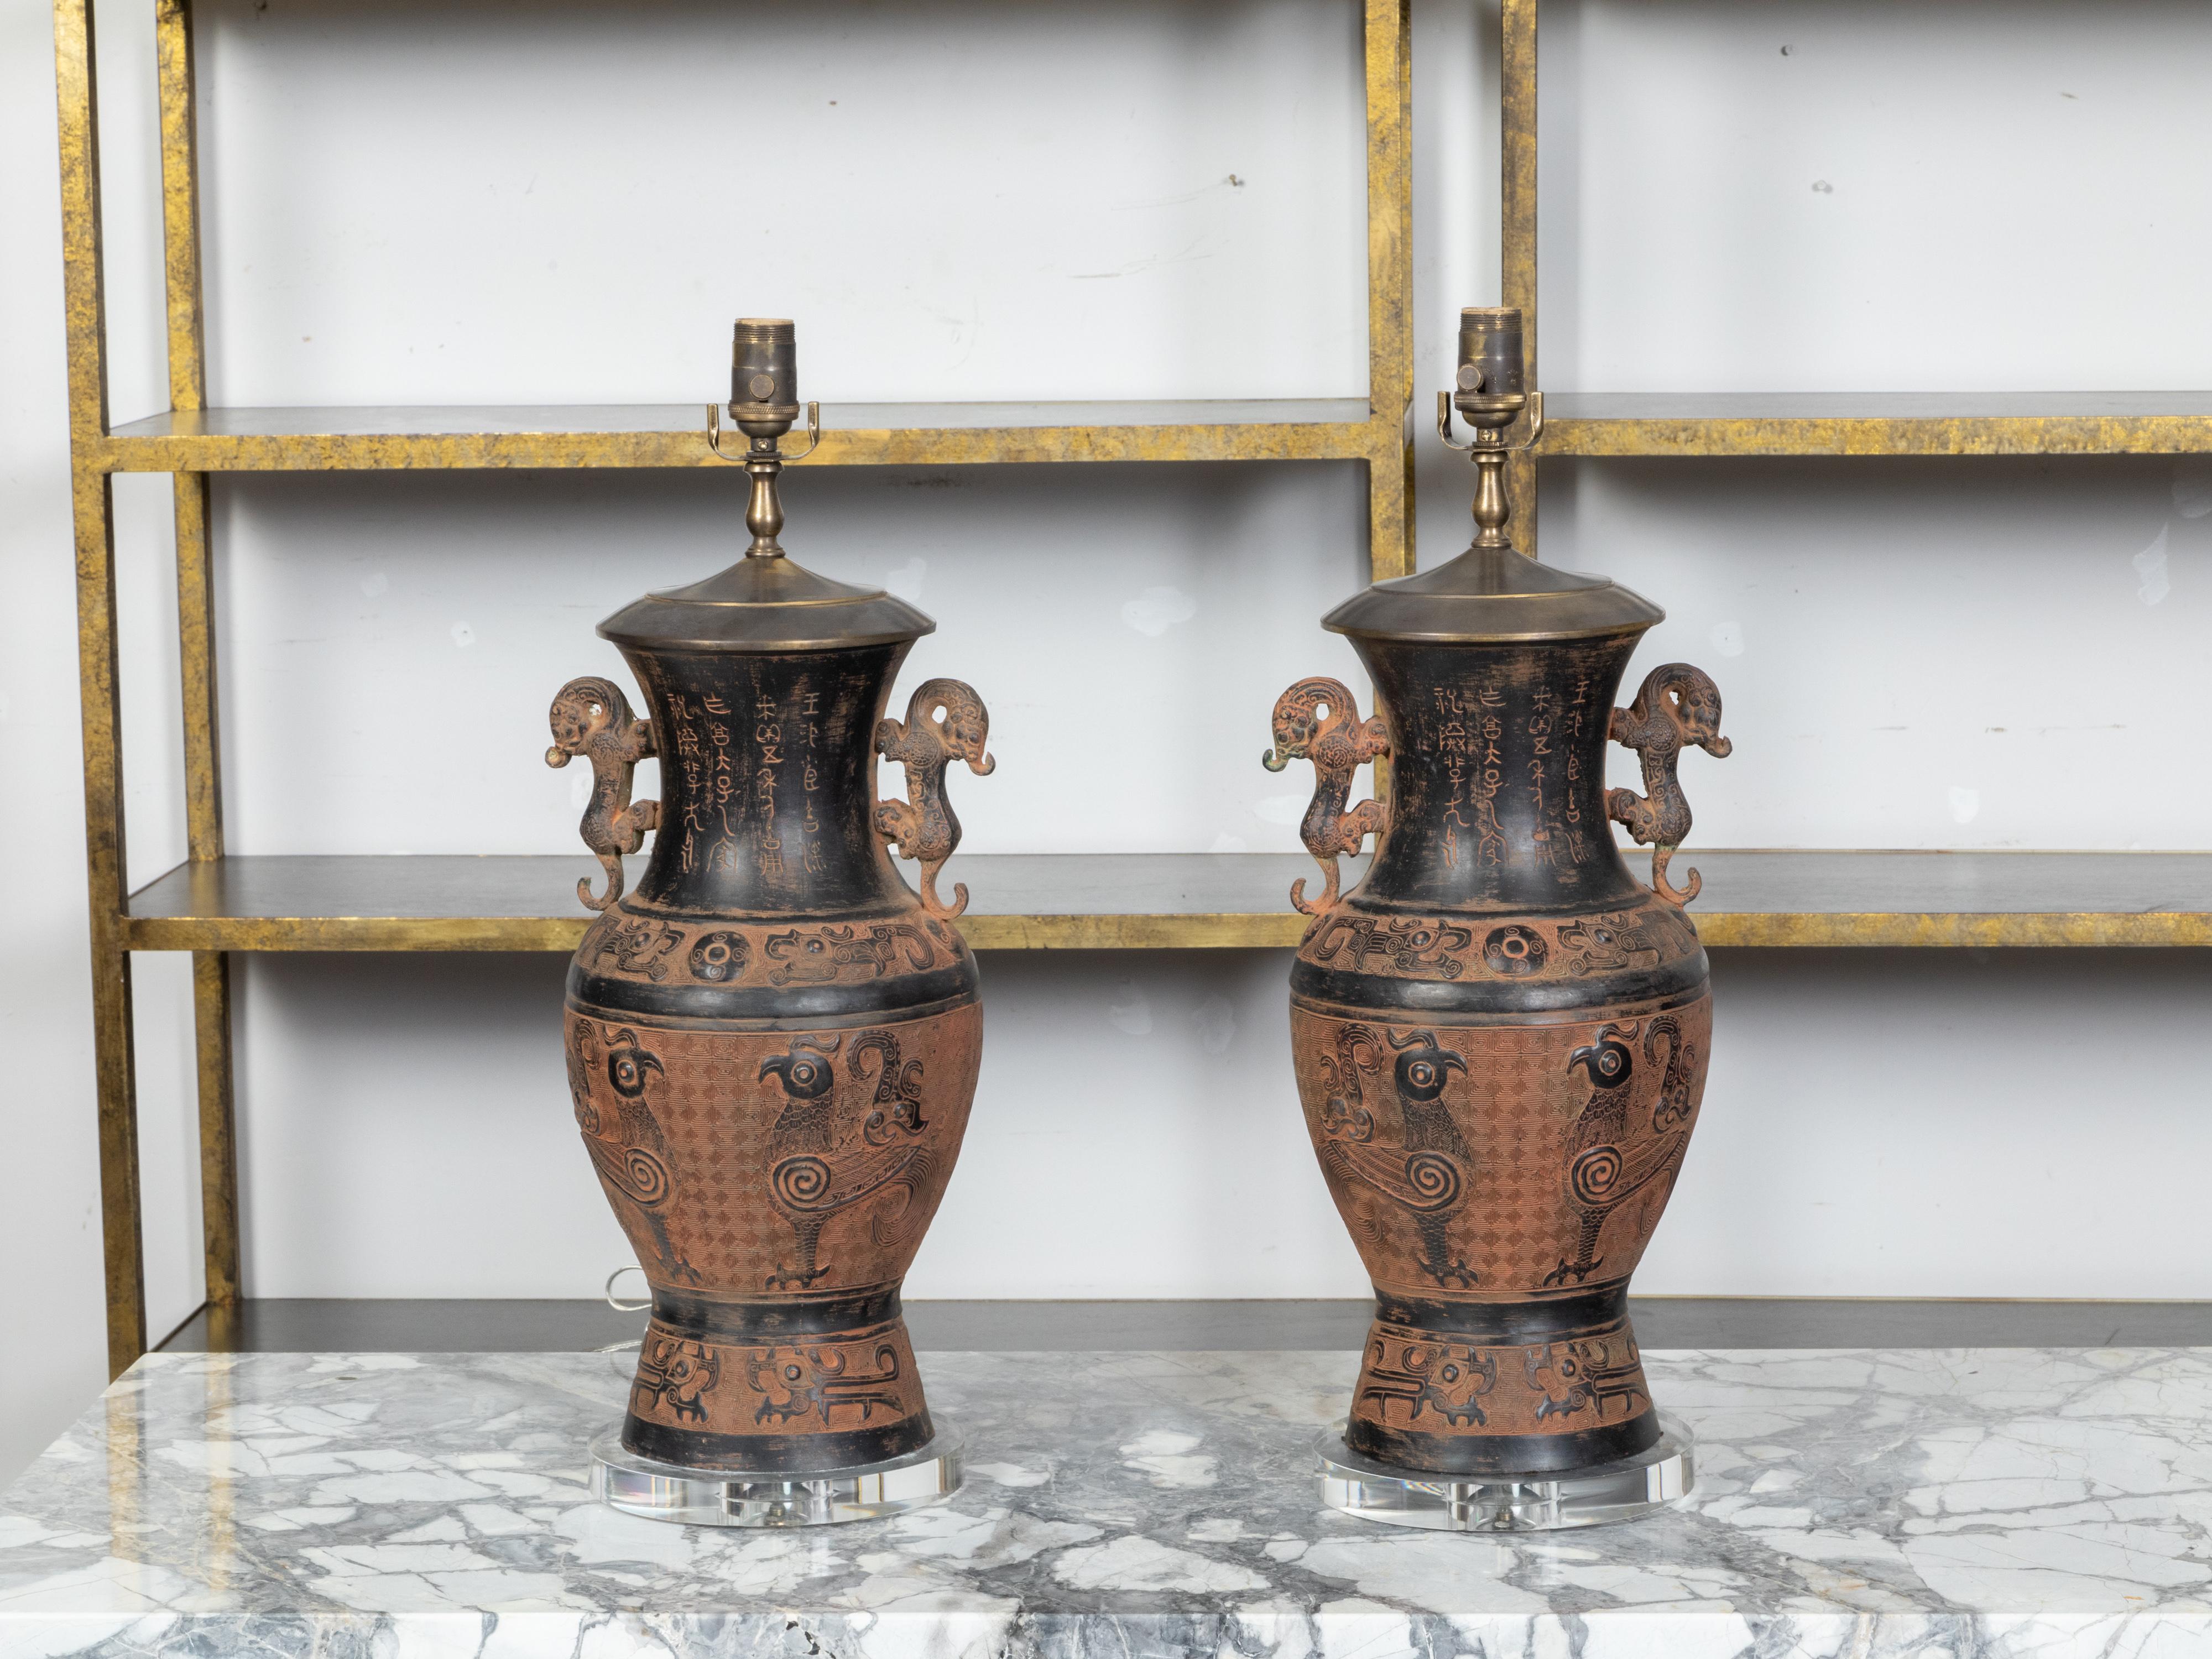 A pair of Asian bronze urn-shaped table lamps from the mid 20th century, with brown and black patina, mythical animals handles, rooster motifs and calligraphy on lucite bases. Created in Asia during the Midcentury period, each of this pair of table